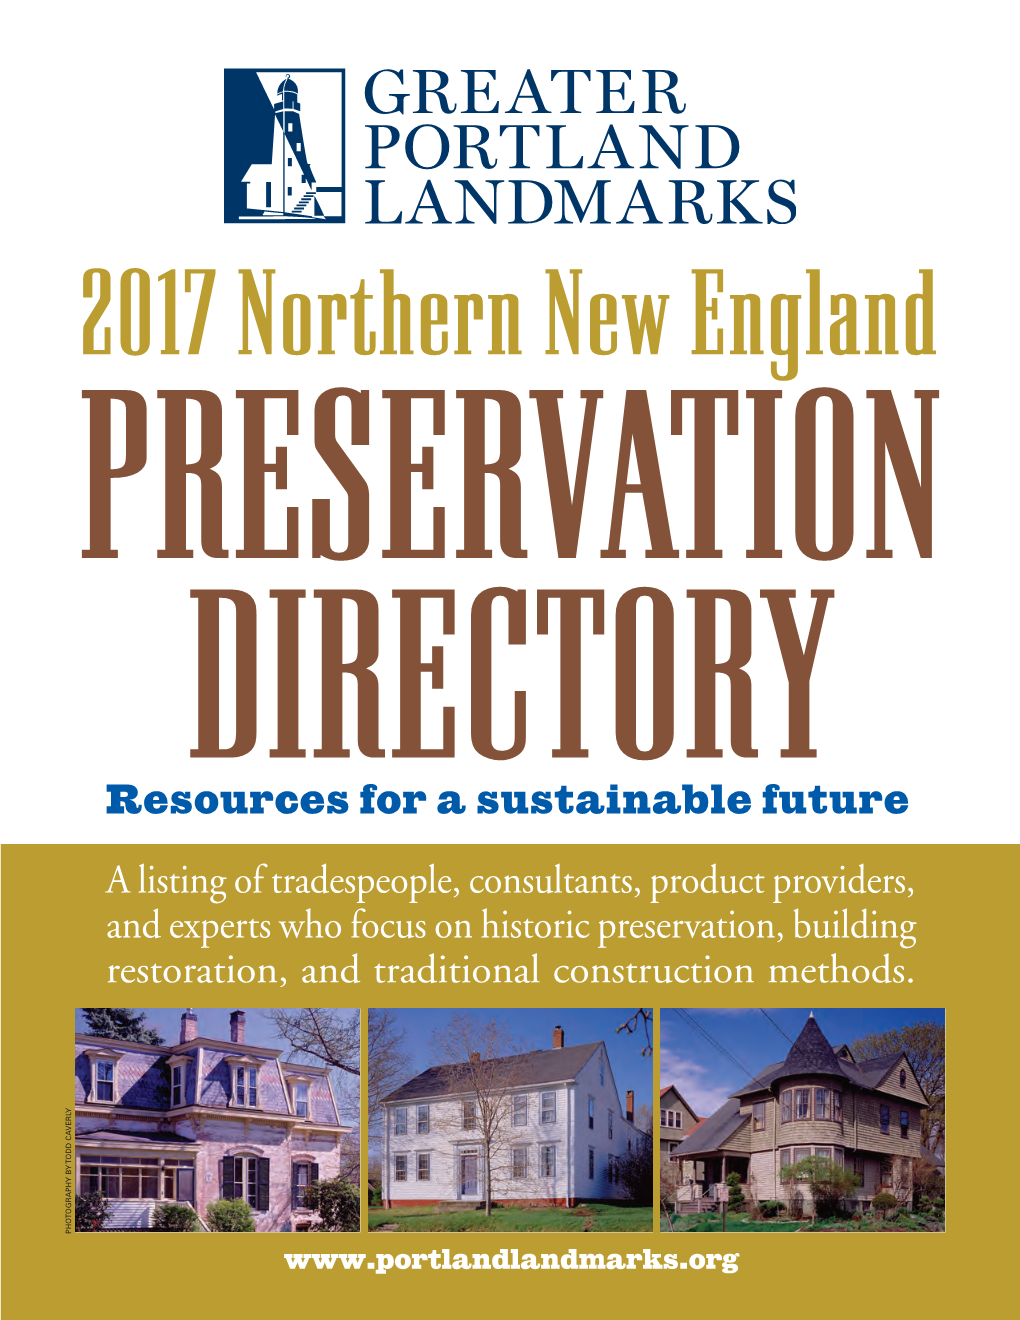 2017 Preservation Directory